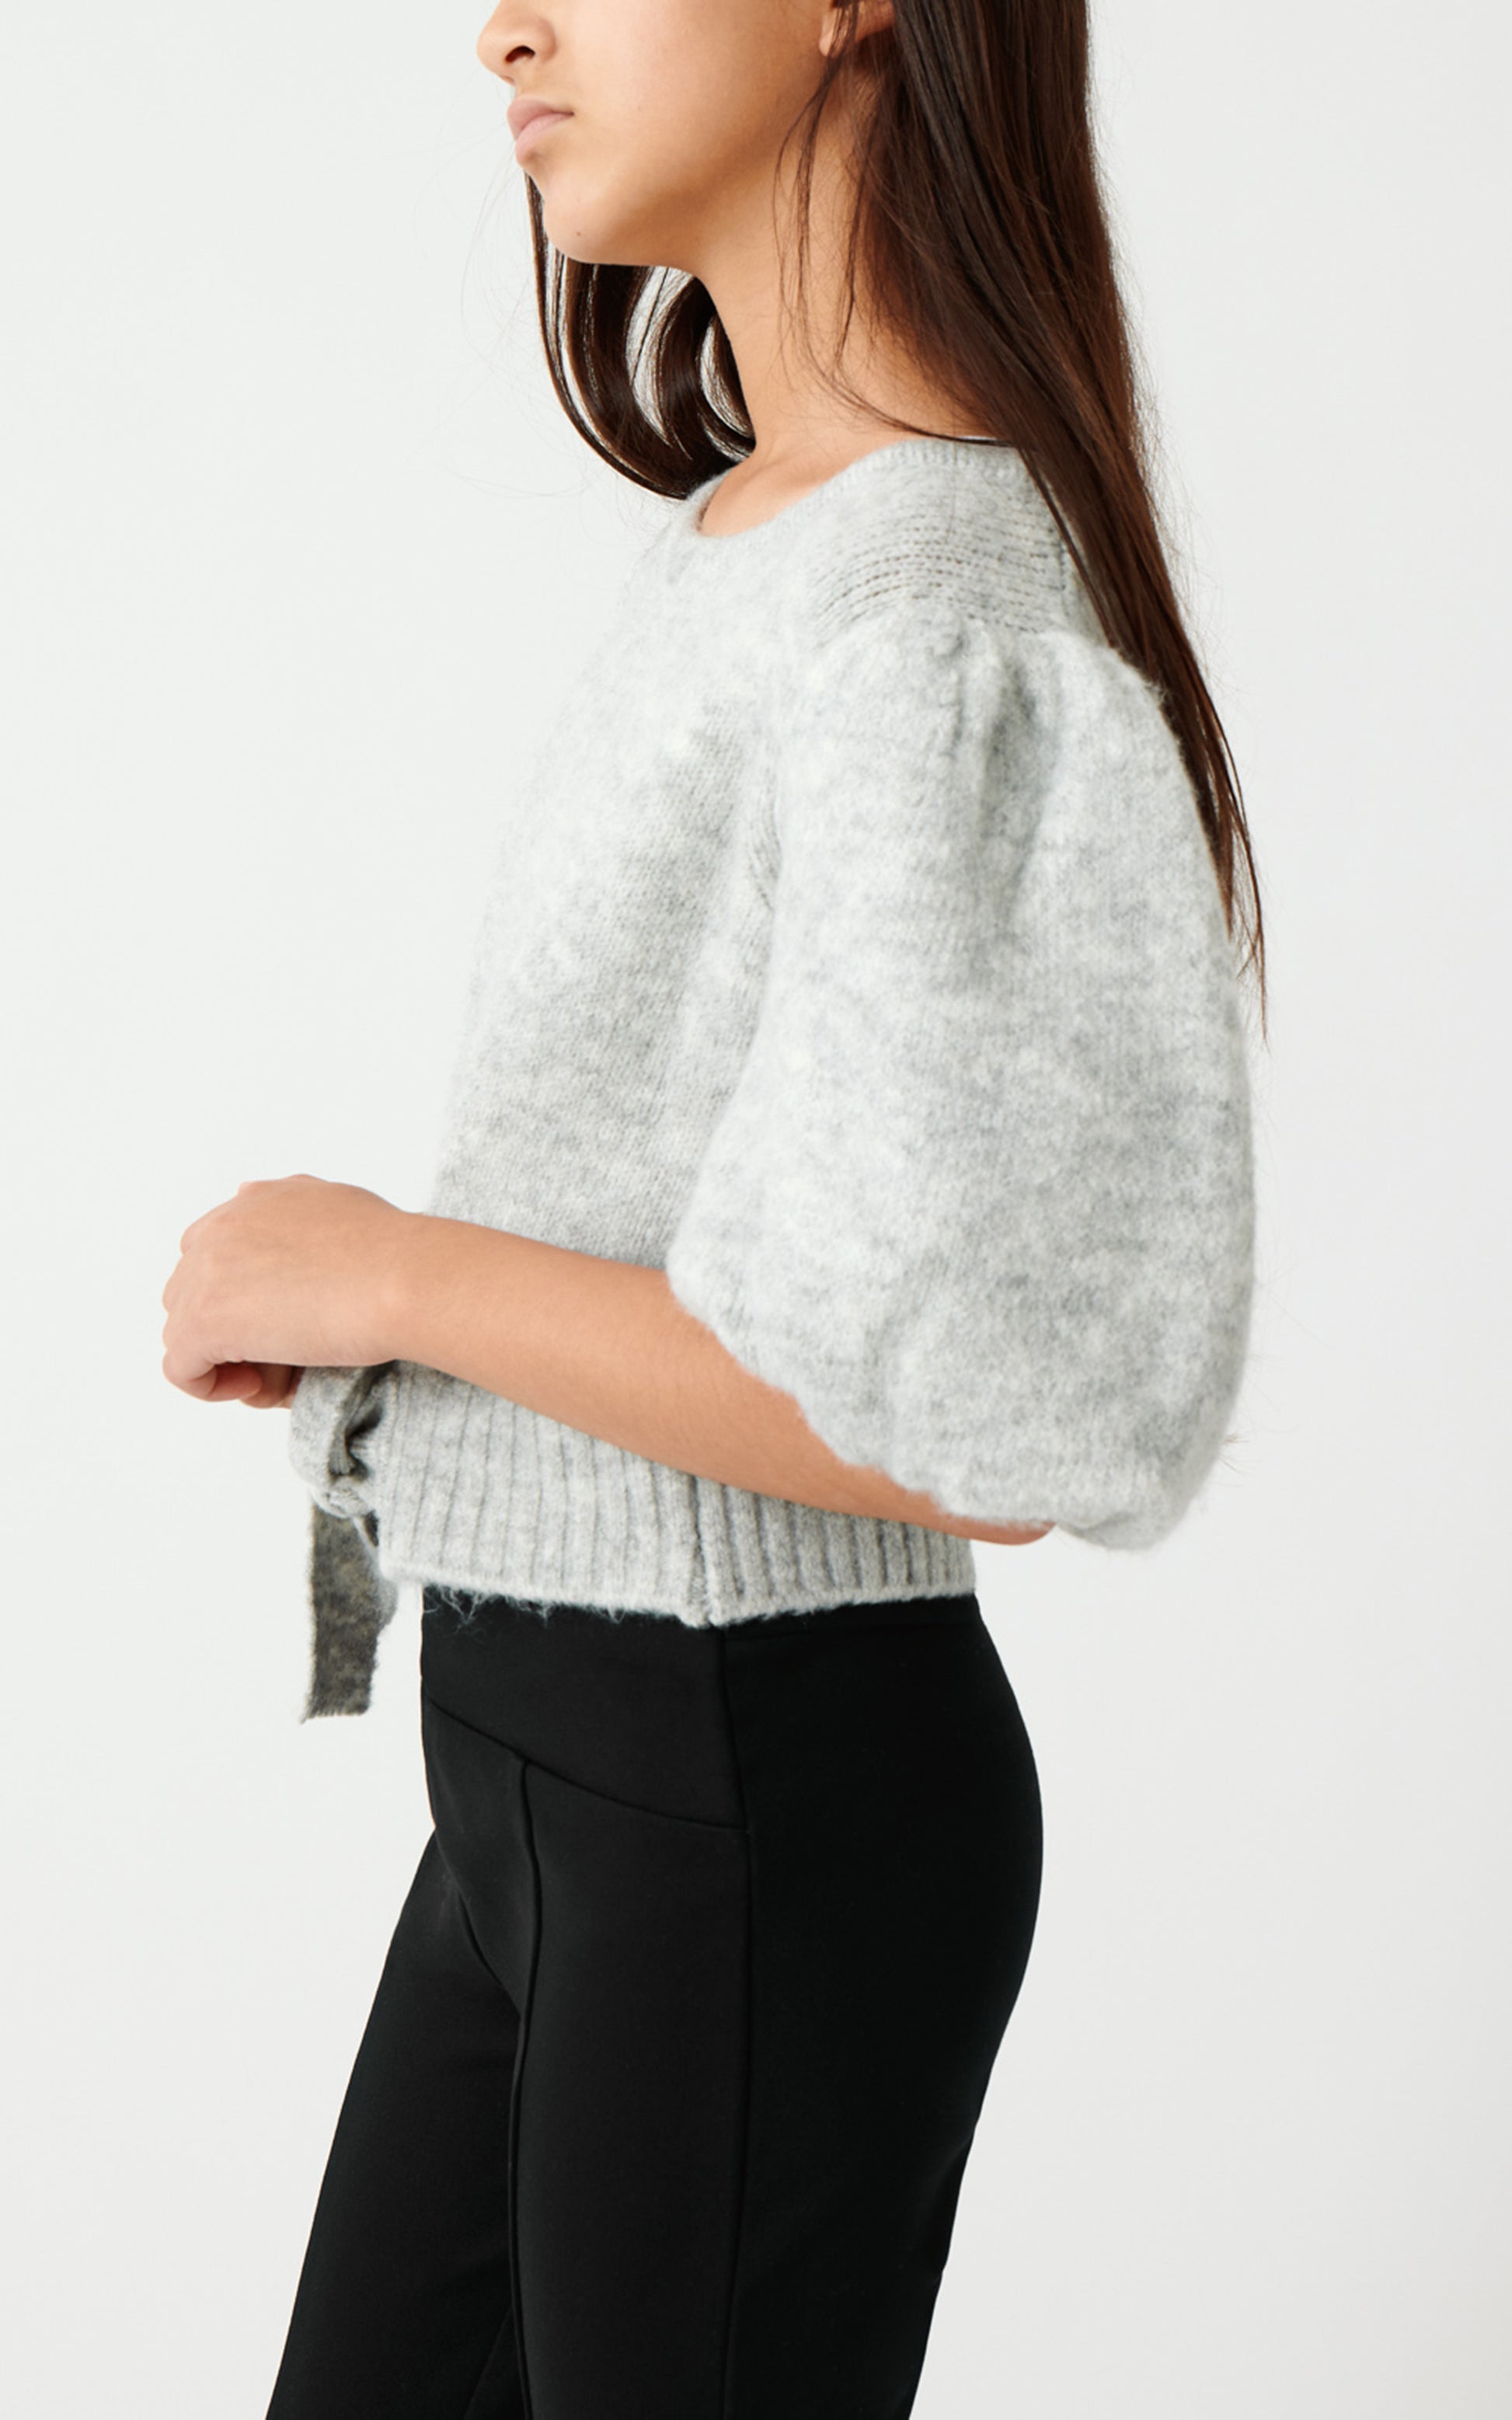 SIDE VIEW OF A GIRL WEARING AN OVERSIZED CROPPED LIGHT GREY SWEATER WITH VERY BIG PUFF SLEEVES AND BLACK PANTS